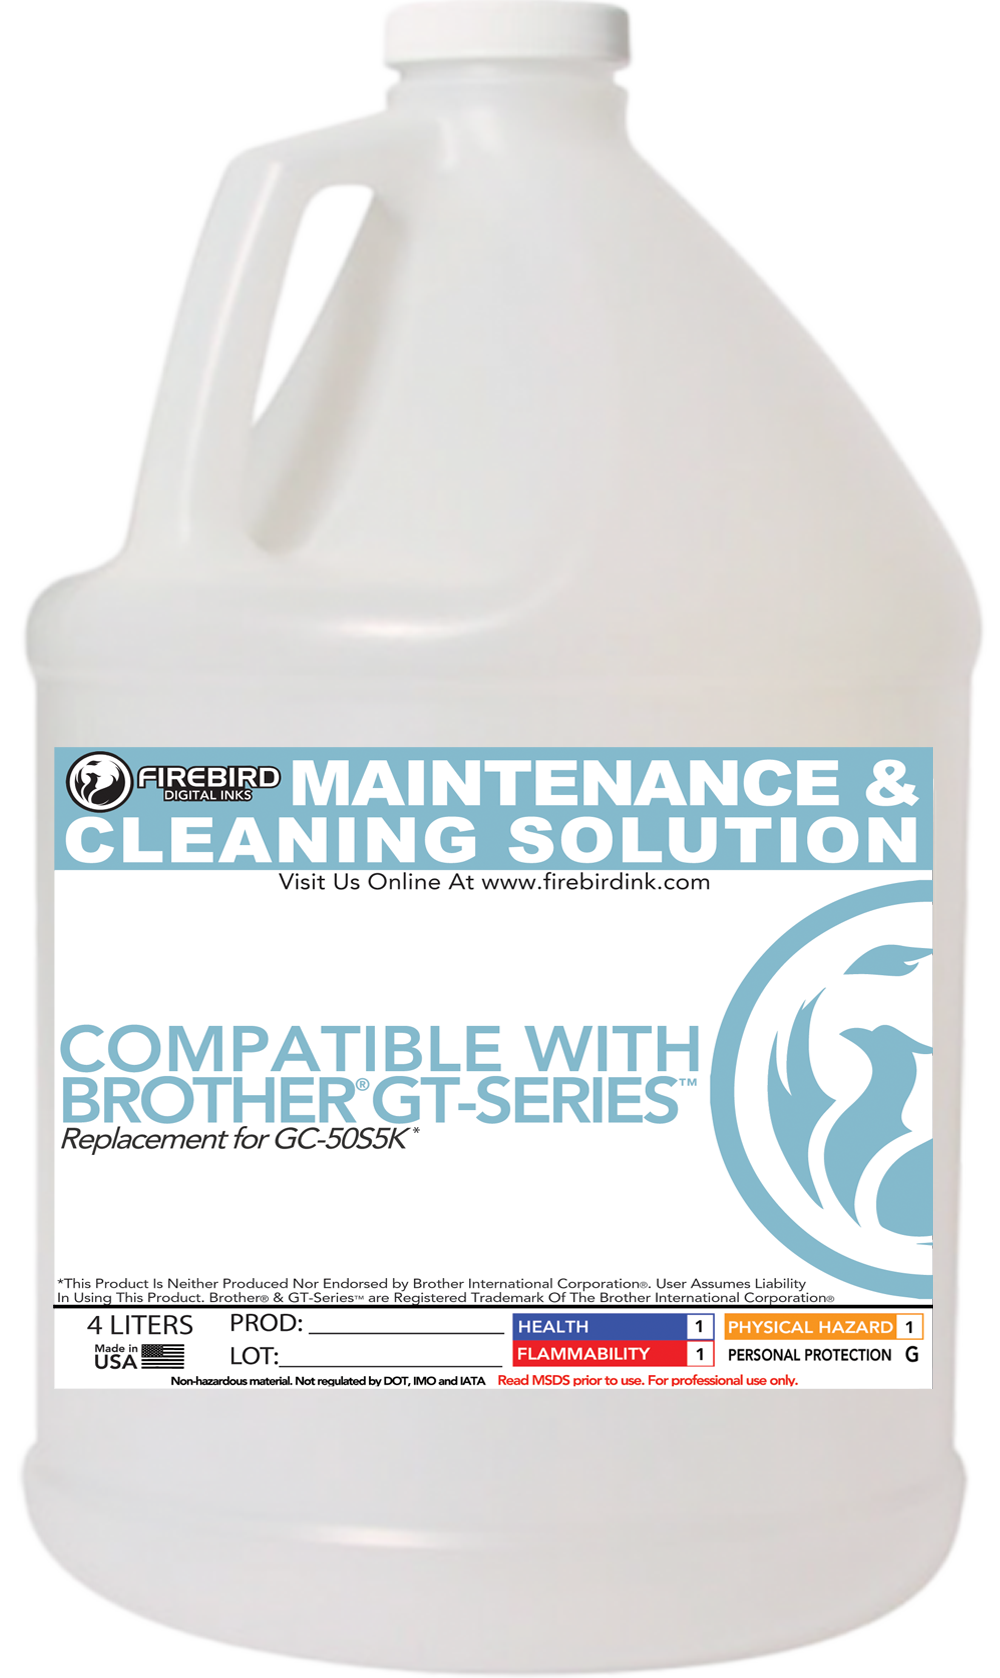 Maintenance & Cleaning Solution Compatible With Brother GT-361 & GT-381